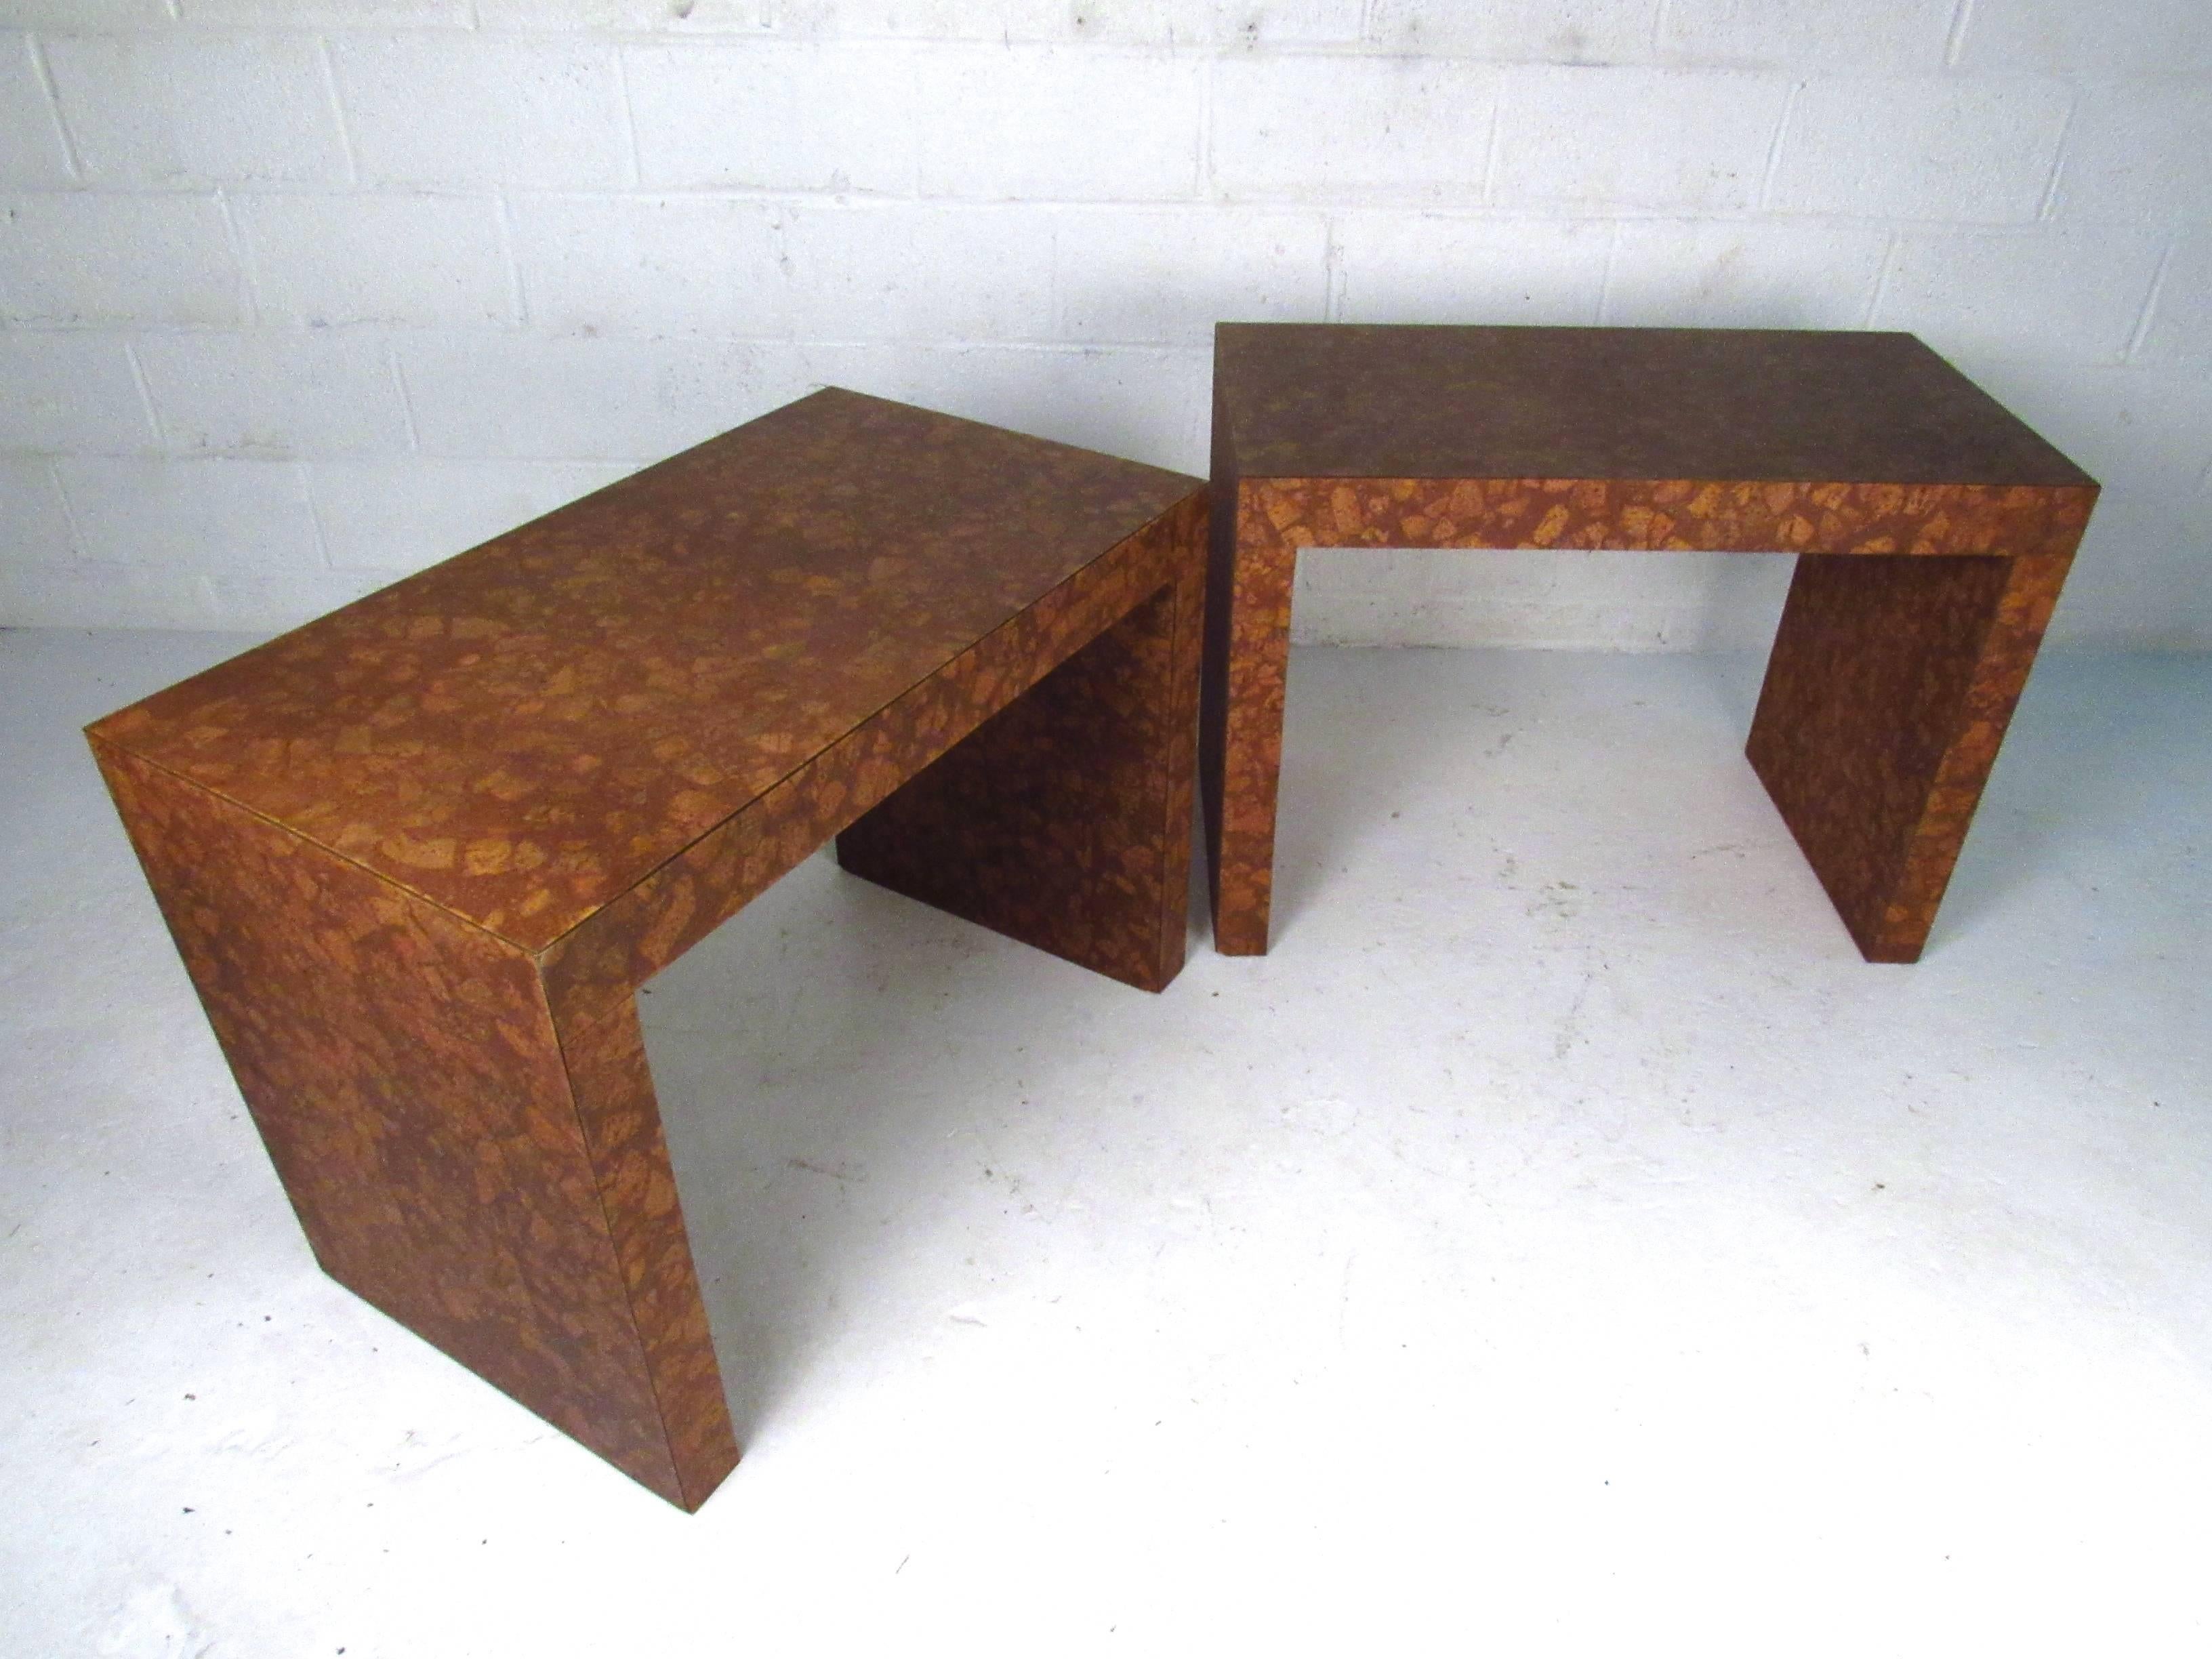 This listing is for one of the two available tables, unique burl cork veneer and parson style design sets these apart from other vintage side tables. These versatile tables offer a variety of uses and are prepared to add a stylish vintage accent to